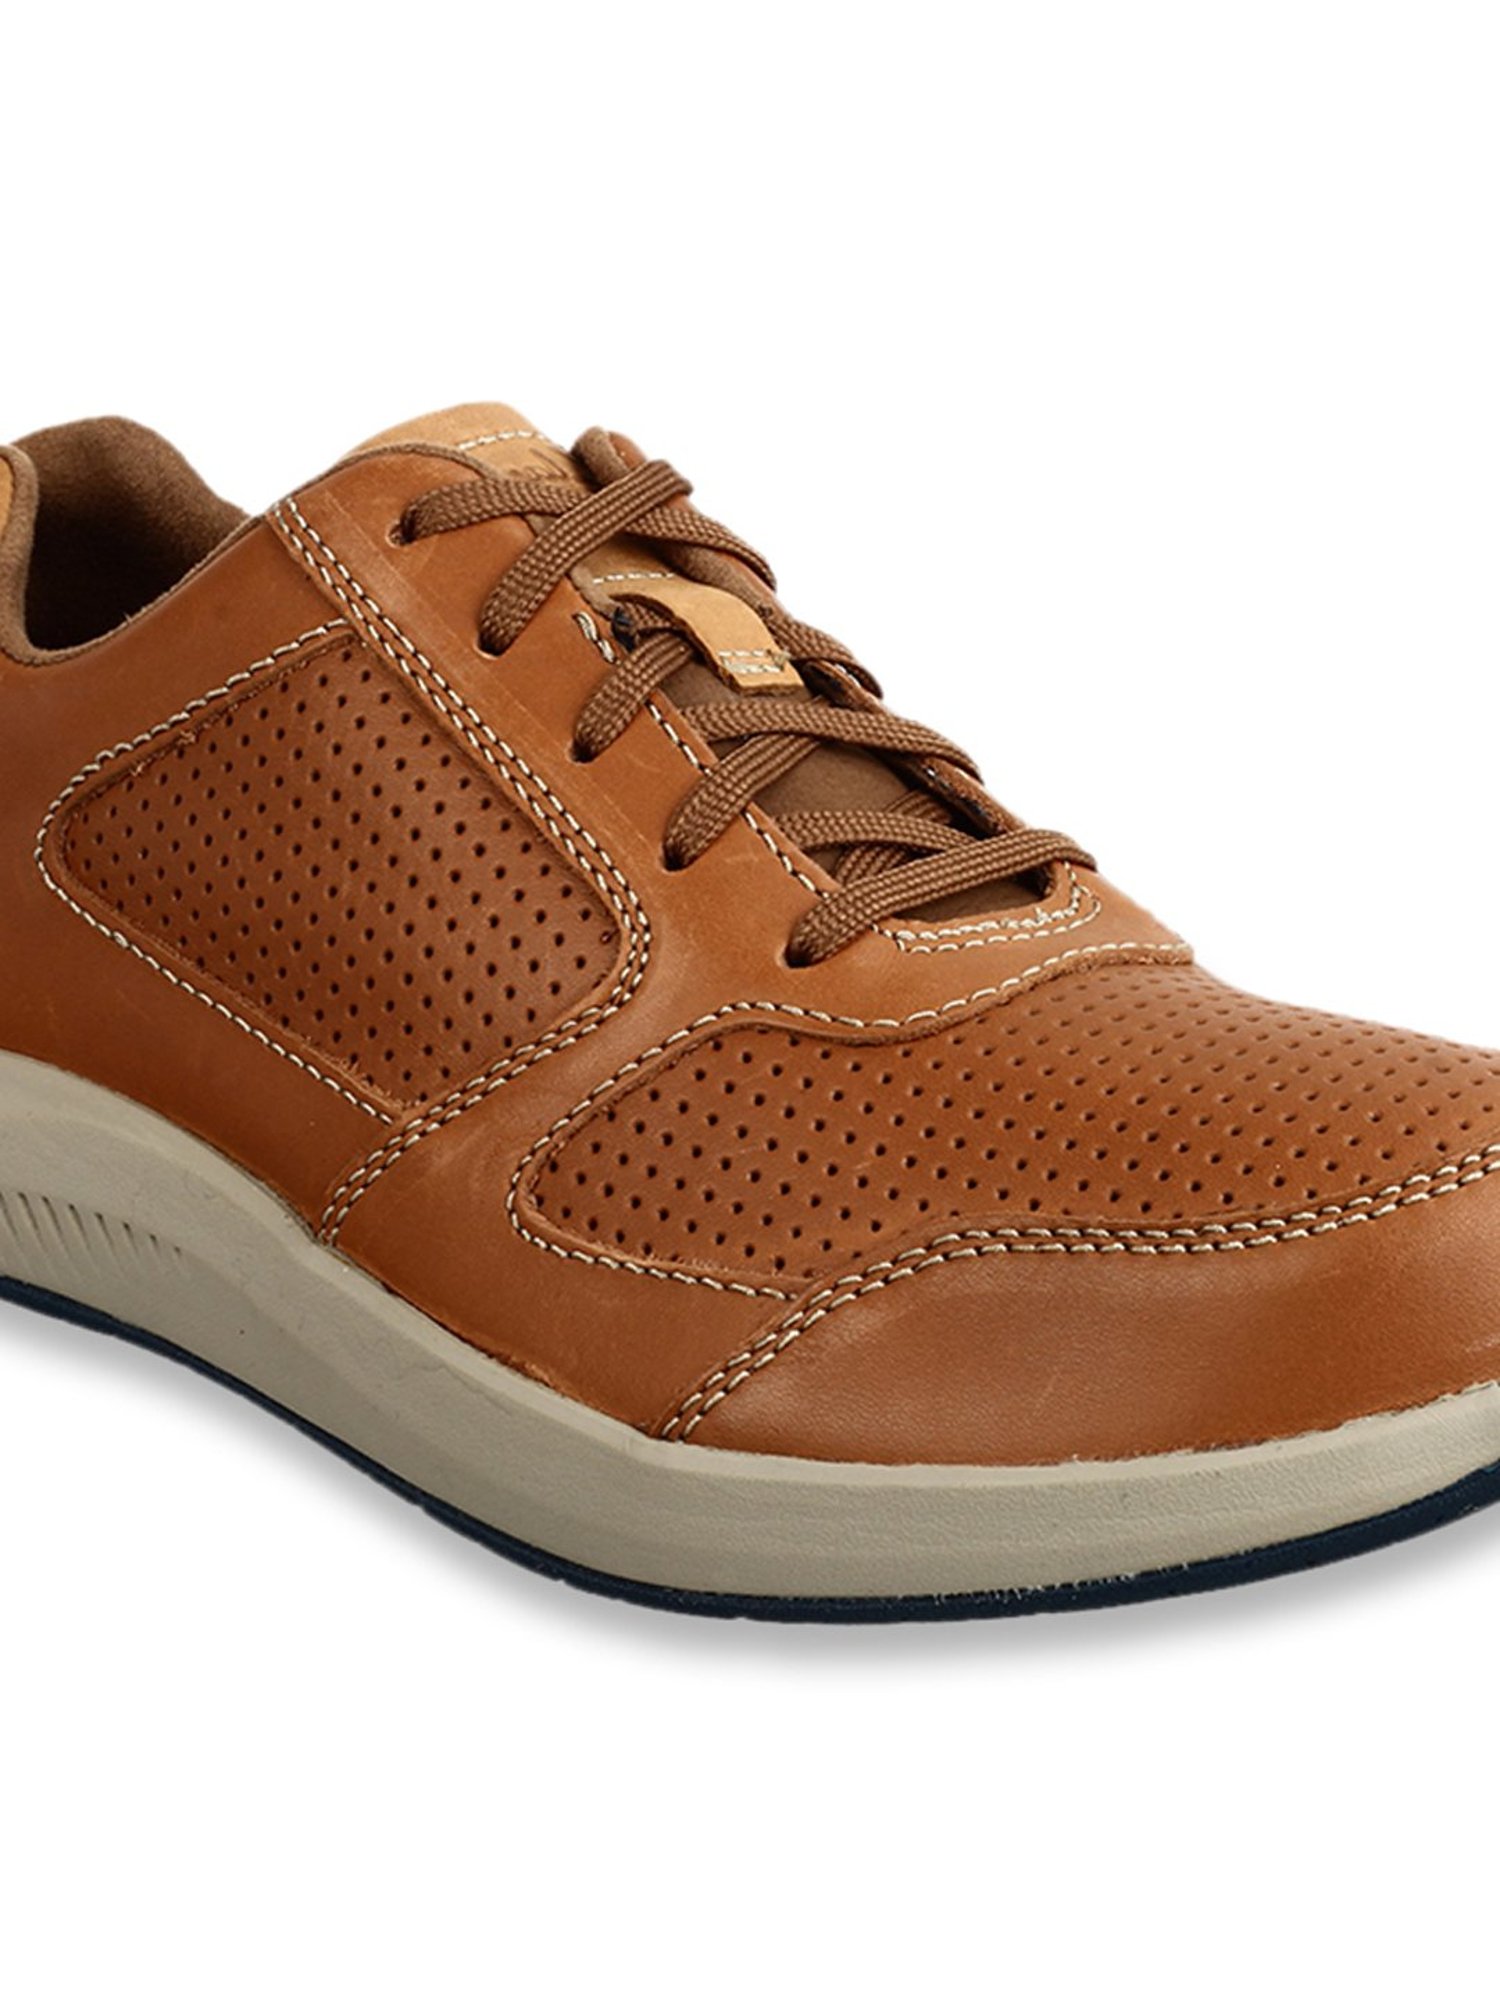 Buy Clarks Sirtis Mix Tan Sneakers for 